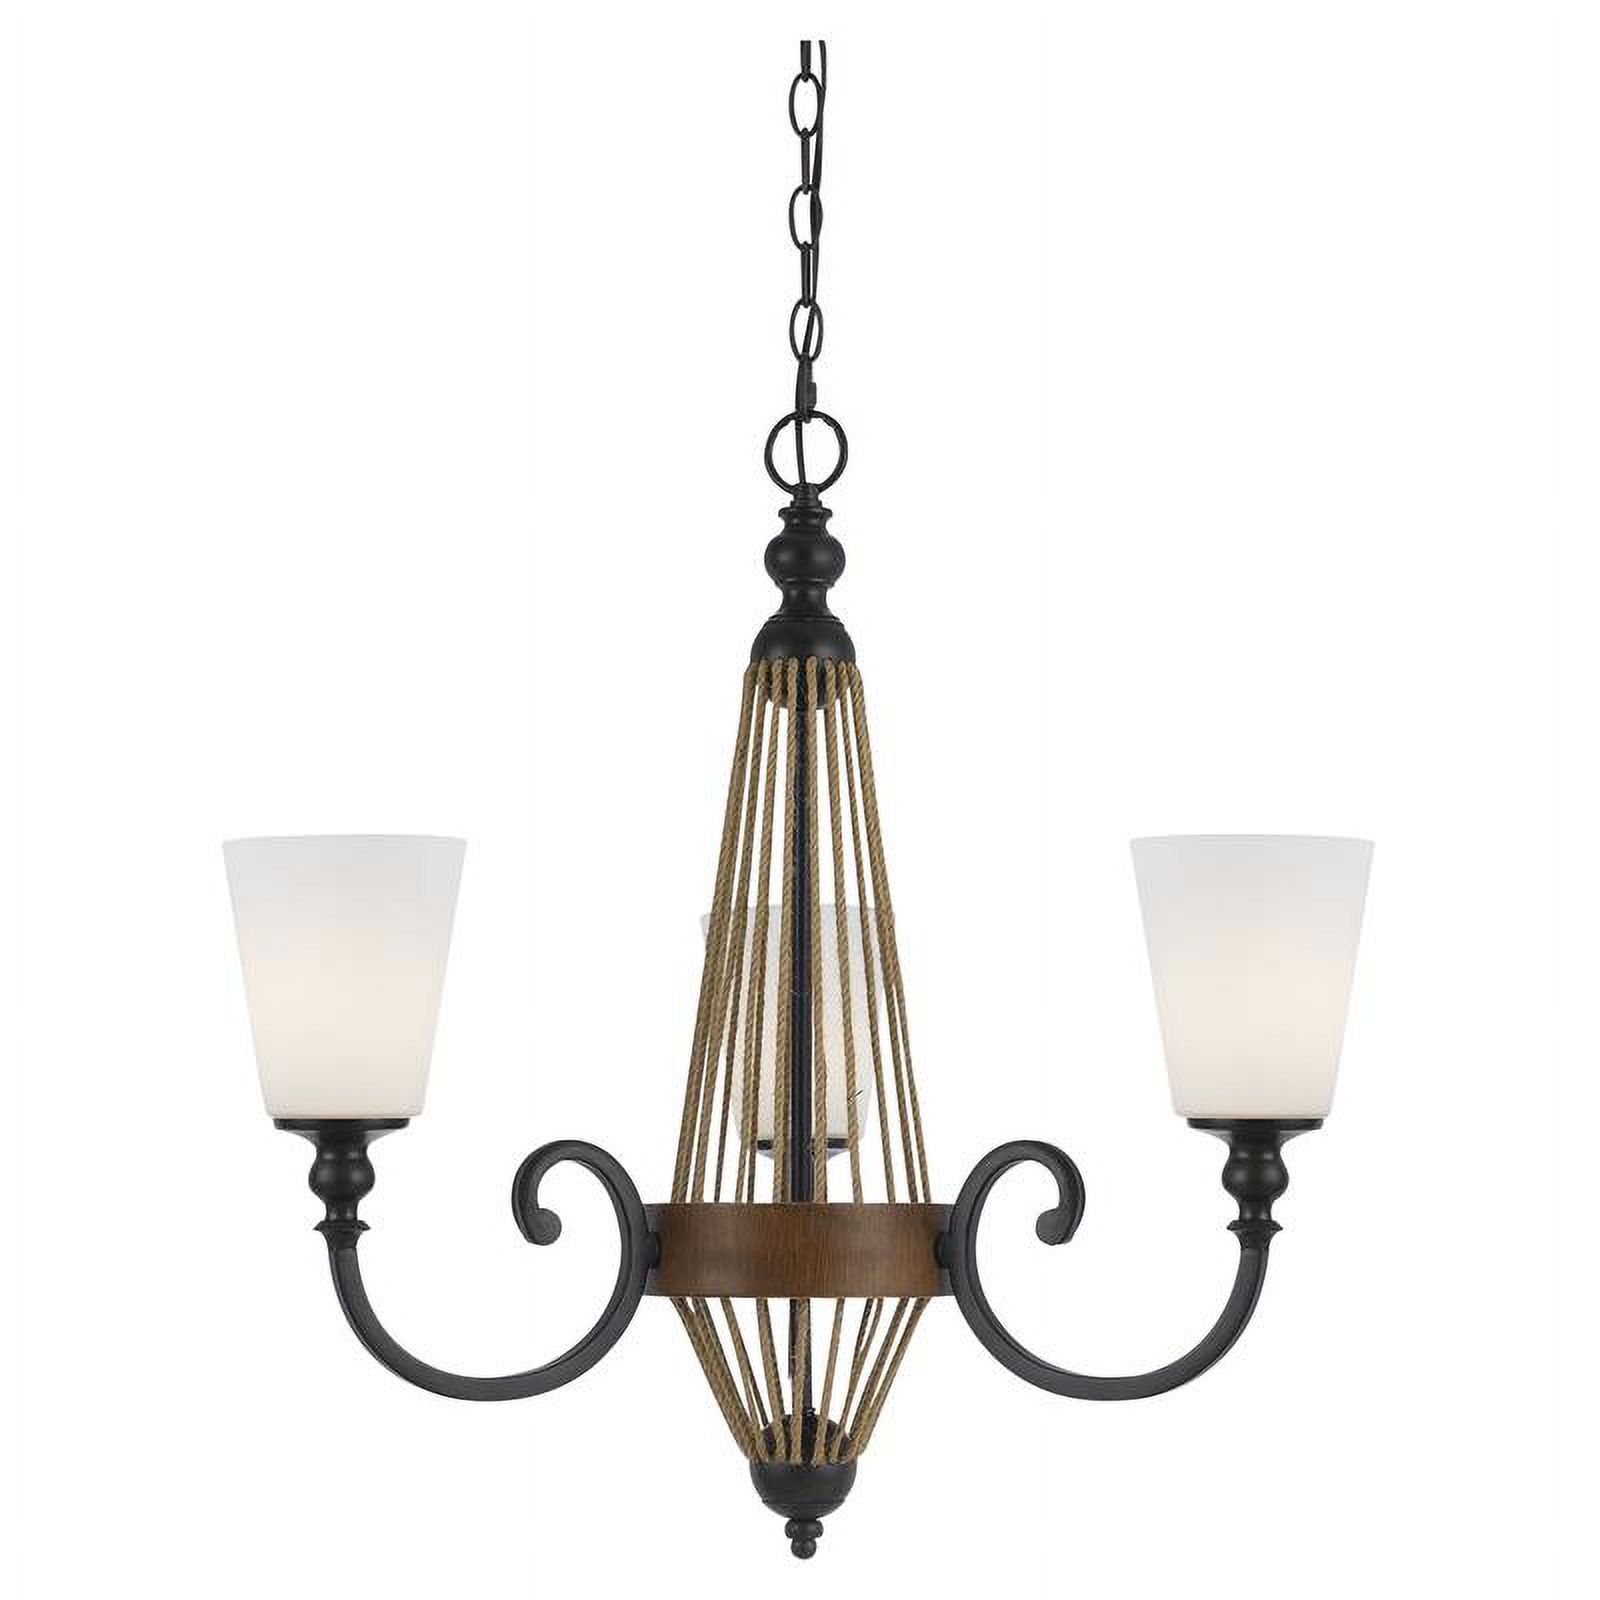 Cal Lighting 25.5" Tall Metal Chandelier in Metal Wood Finish-Color:Metal/Wood,Finish:Metal/Wood,Material:Glass,Shape:Round,Wattage:60WX3 - image 2 of 2